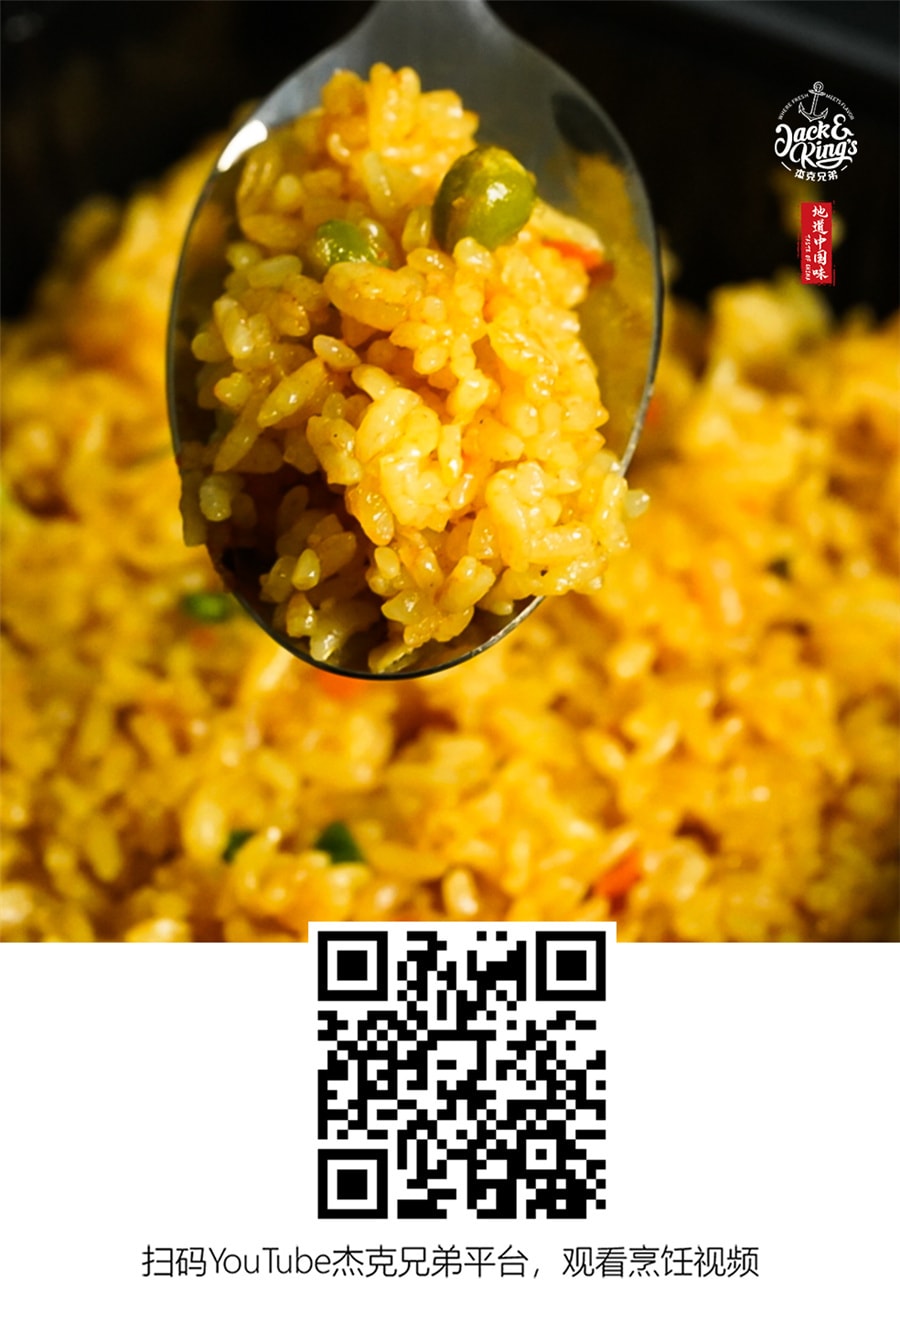 Taste of China Fried RIce with Curry 300g